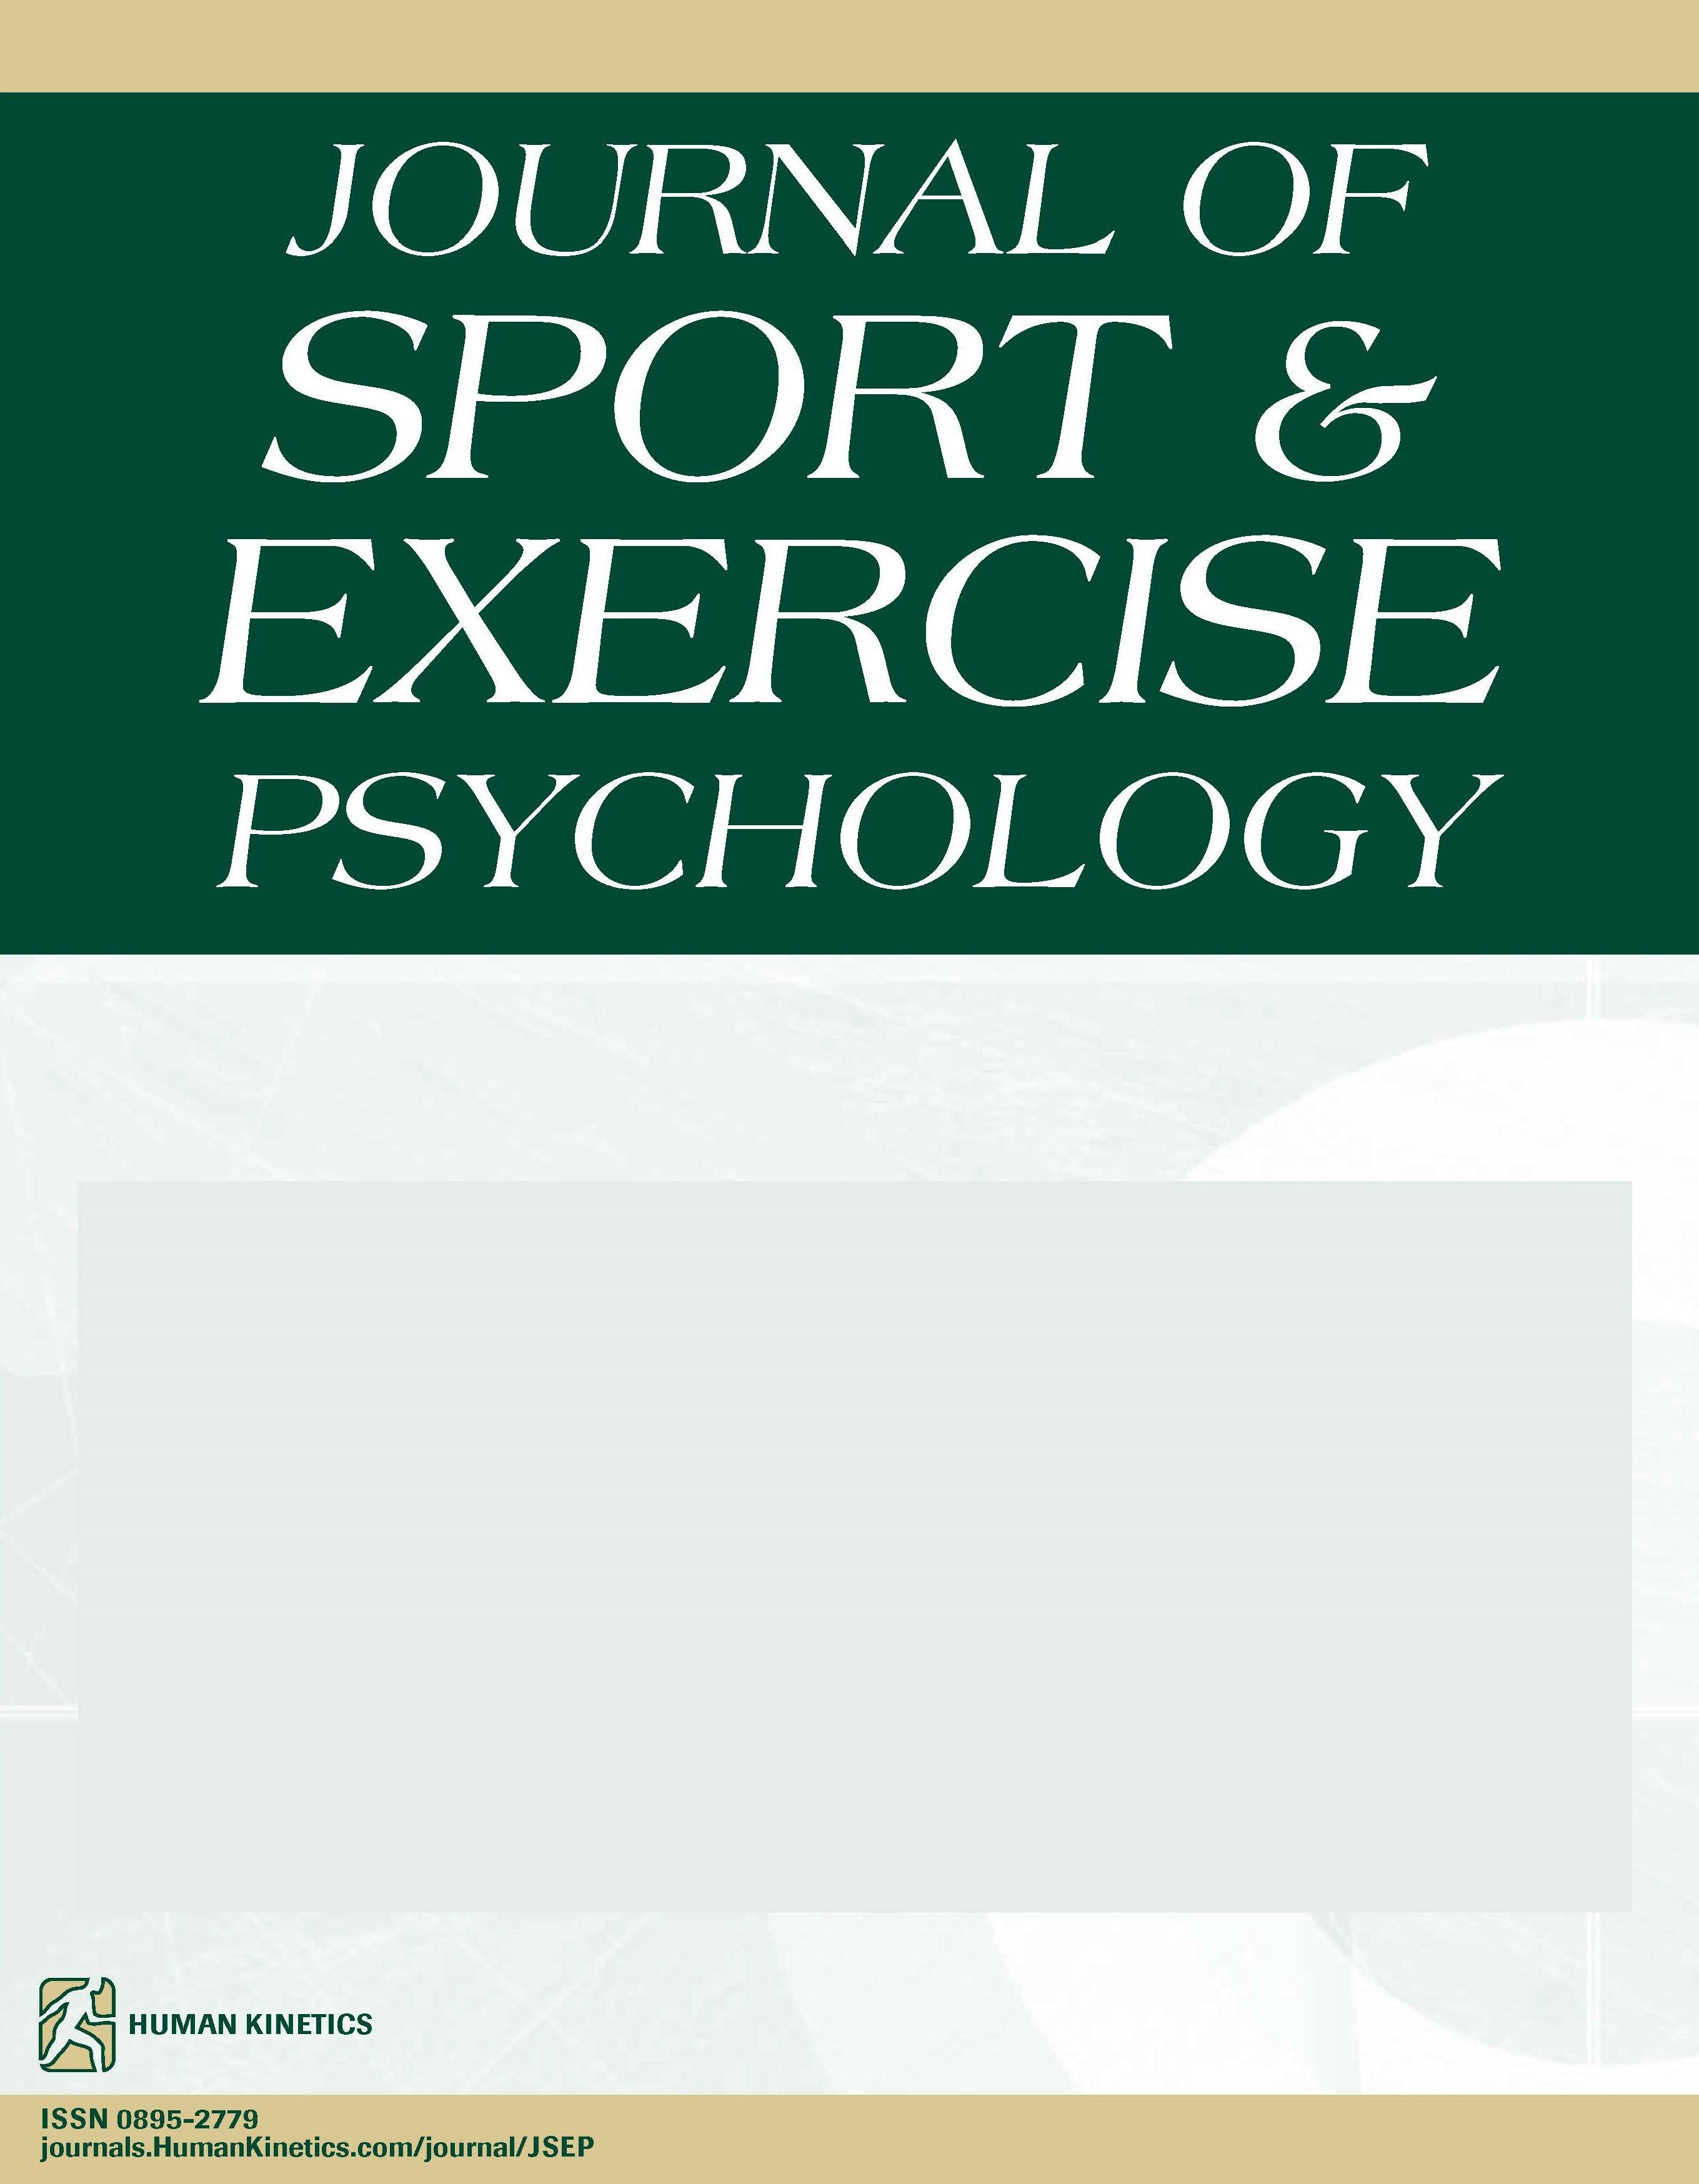 Comparisons and Conversions: A Methodological Note and Caution for Meta-Analysis in Sport and Exercise Psychology